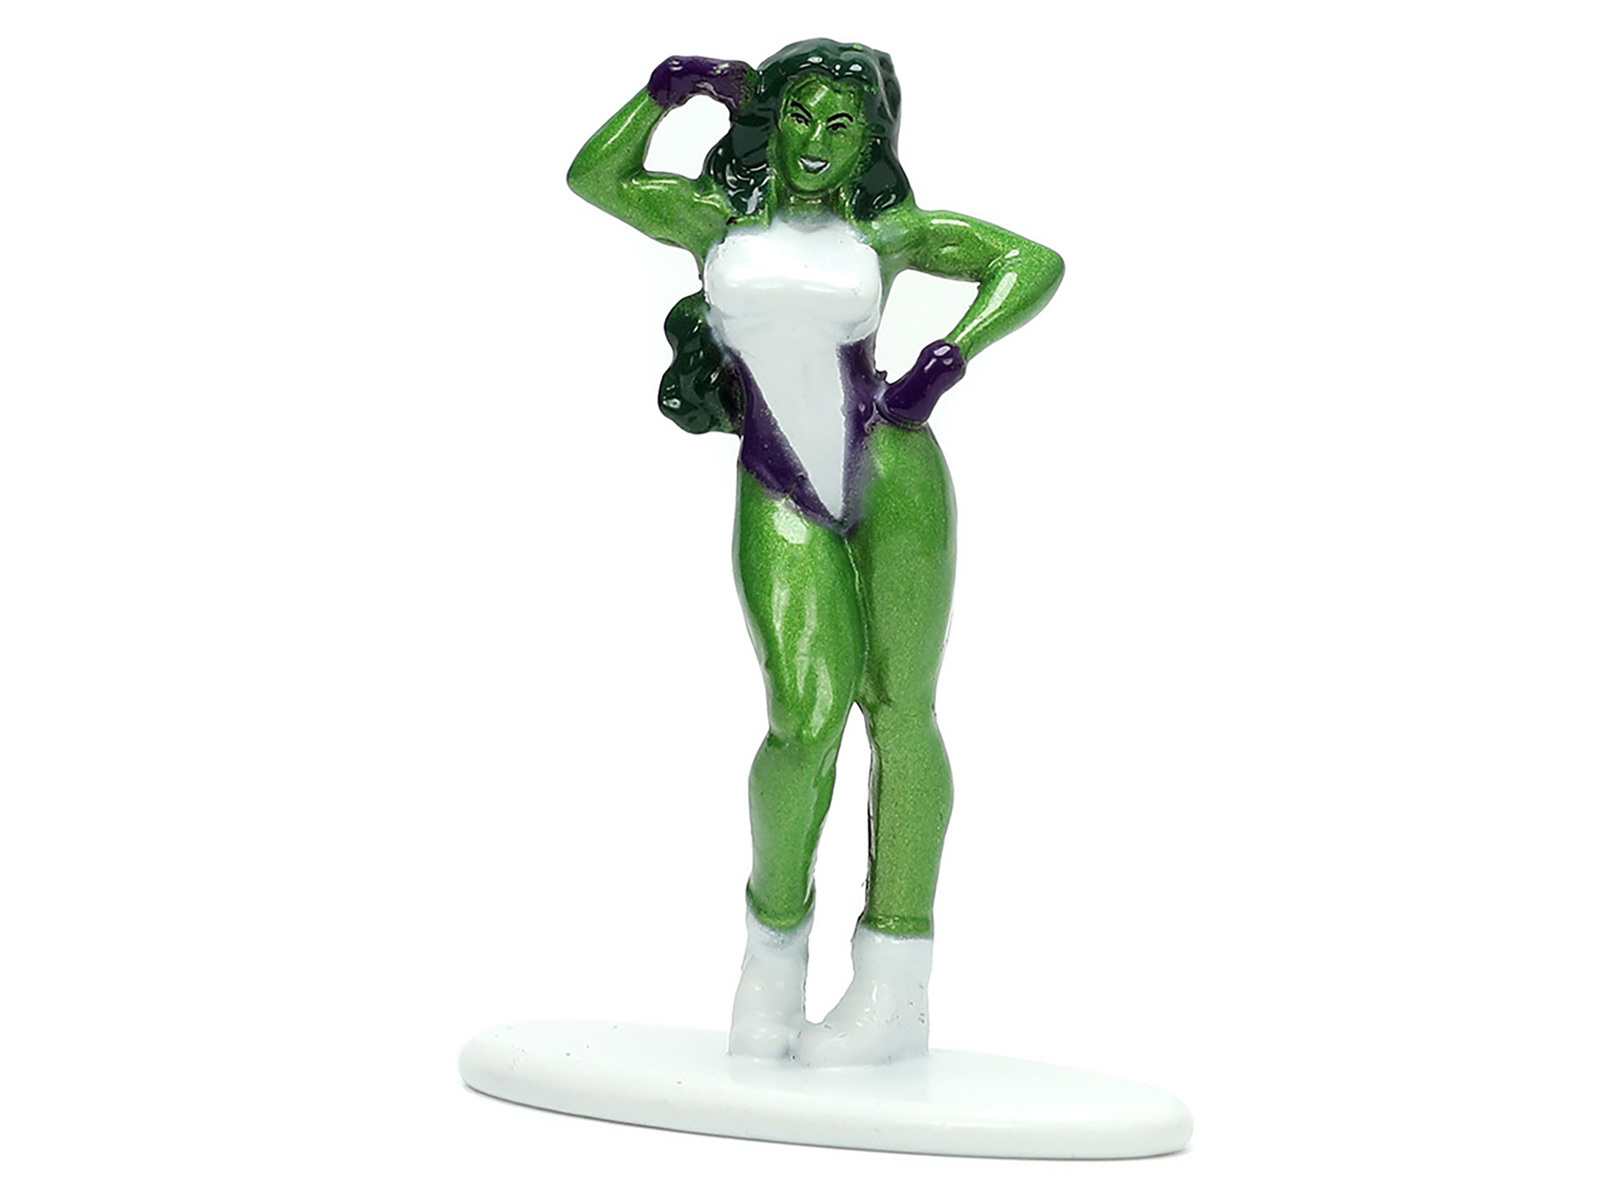 1973 Plymouth Barracuda Green Metallic and White and She-Hulk Diecast Figure "Th - $21.51